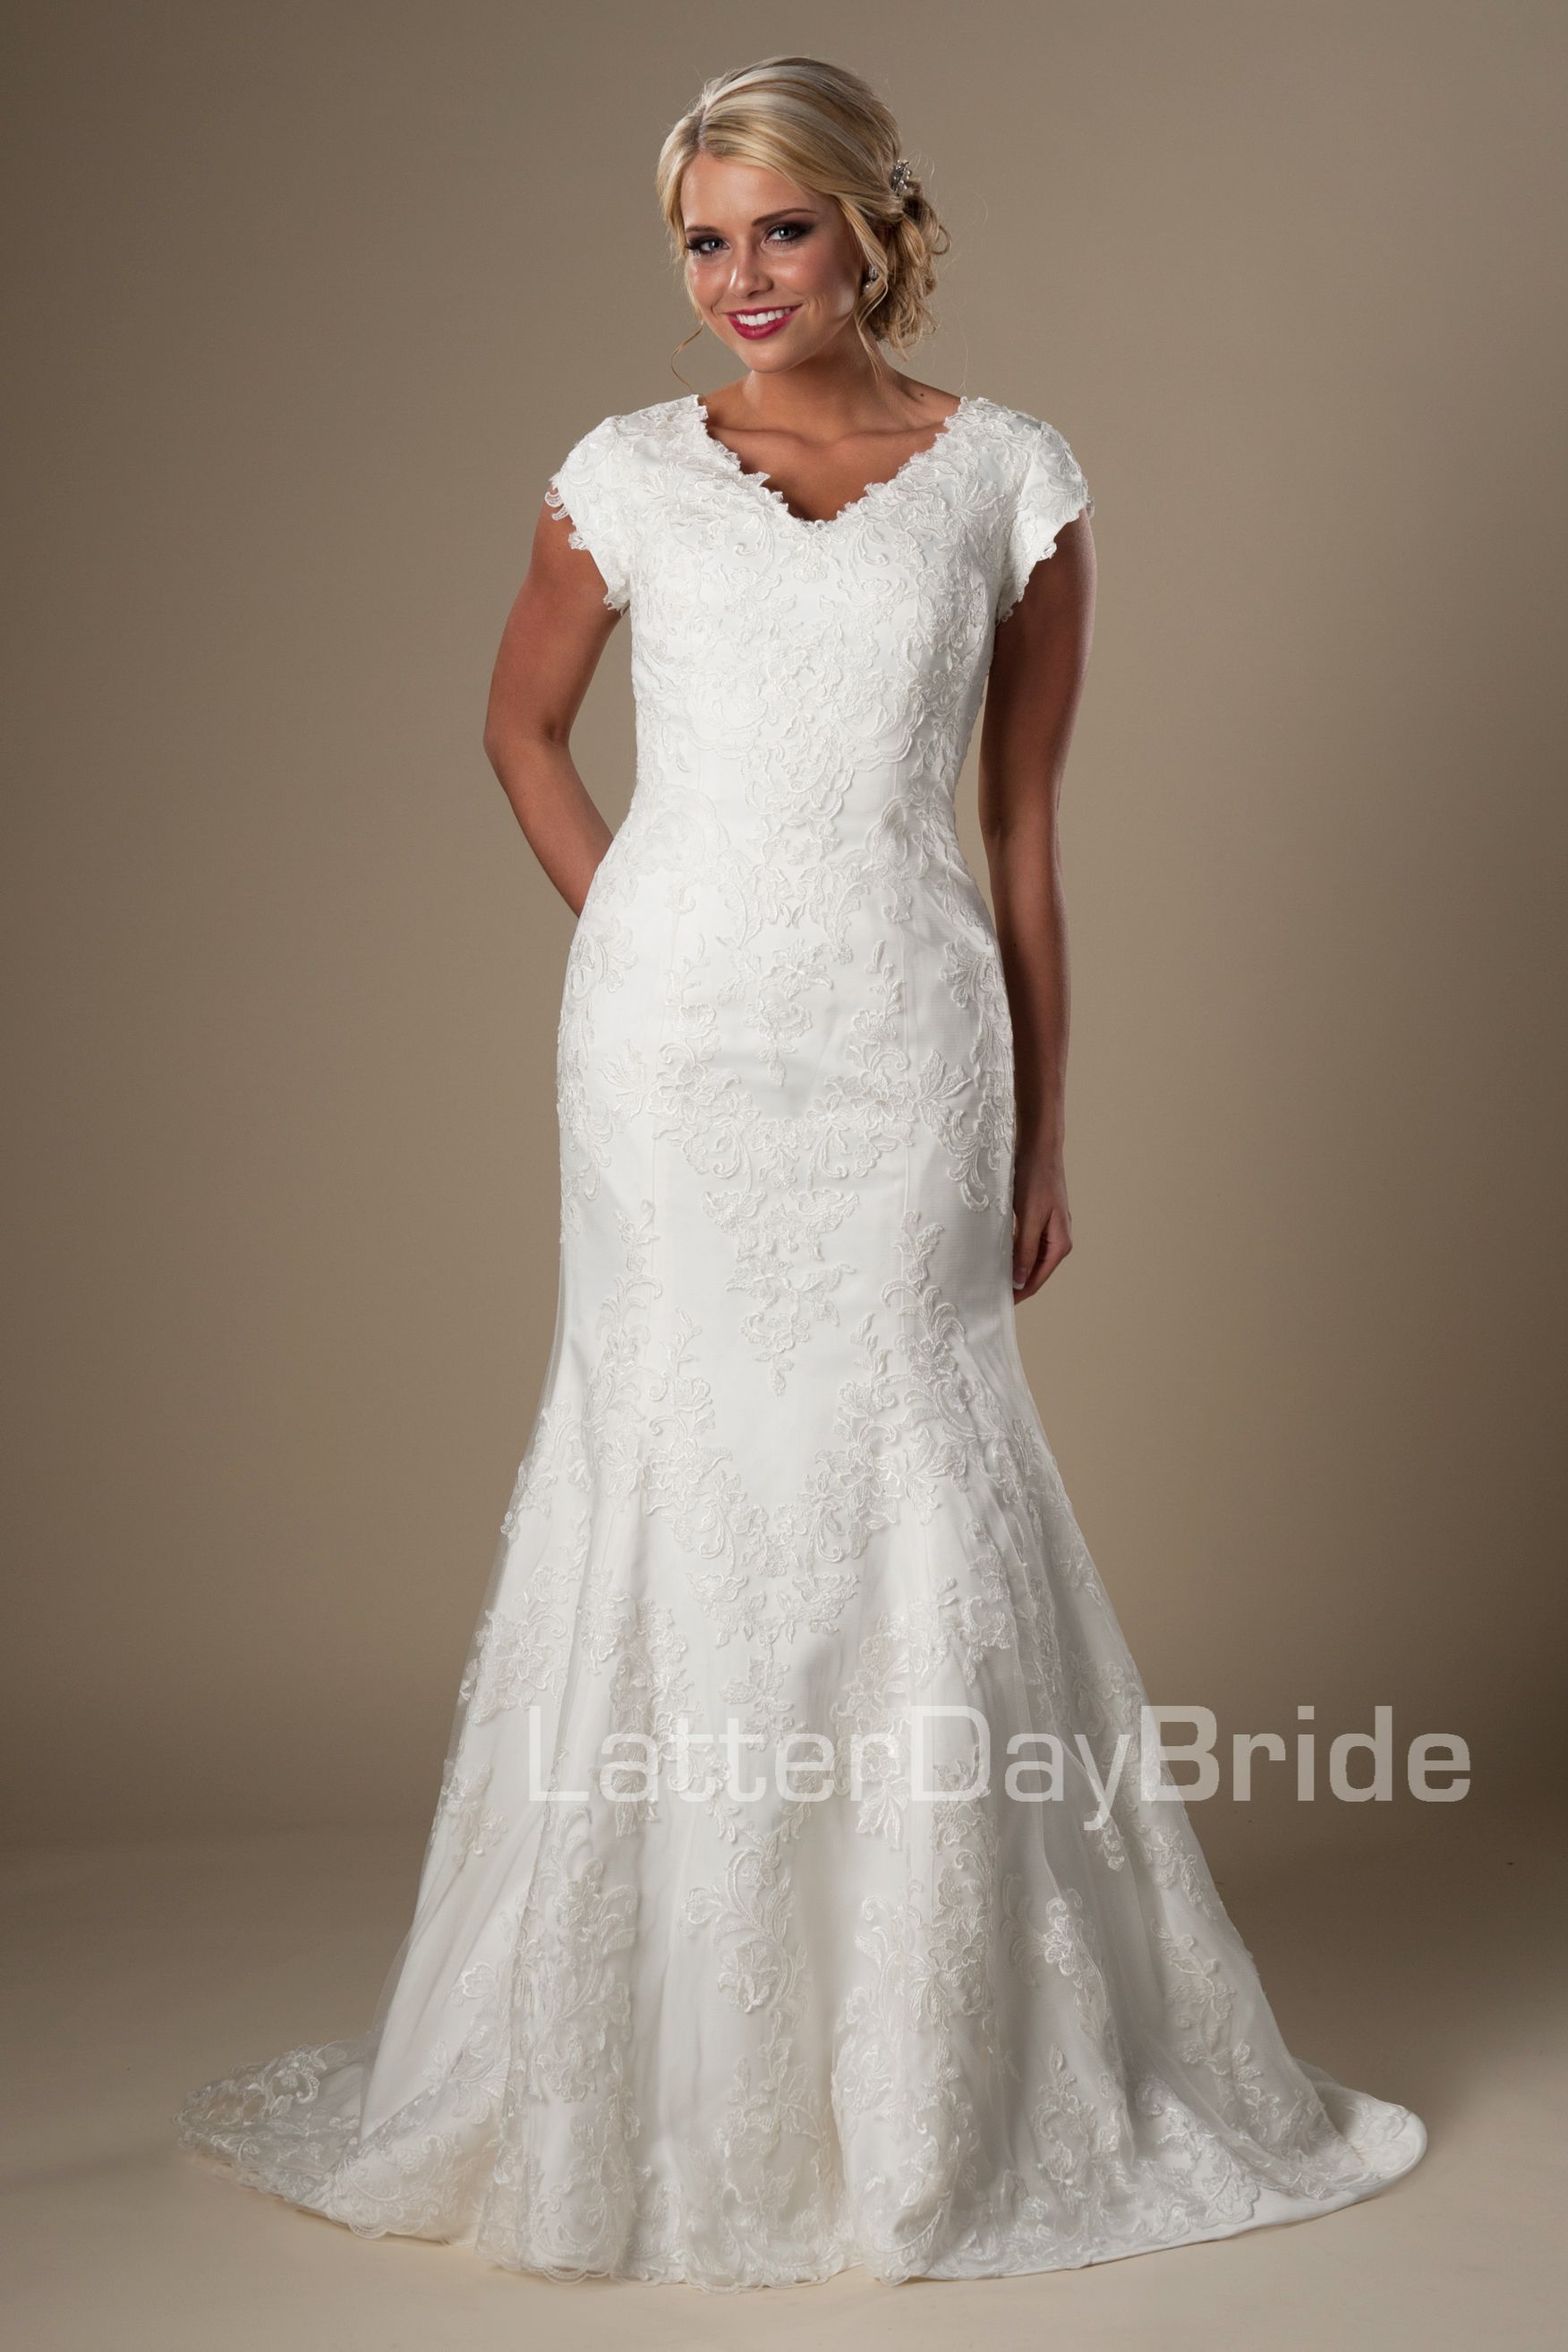 Mermaid Short Sleeves Modest Wedding Dresses Ivory Lace Appliques ...